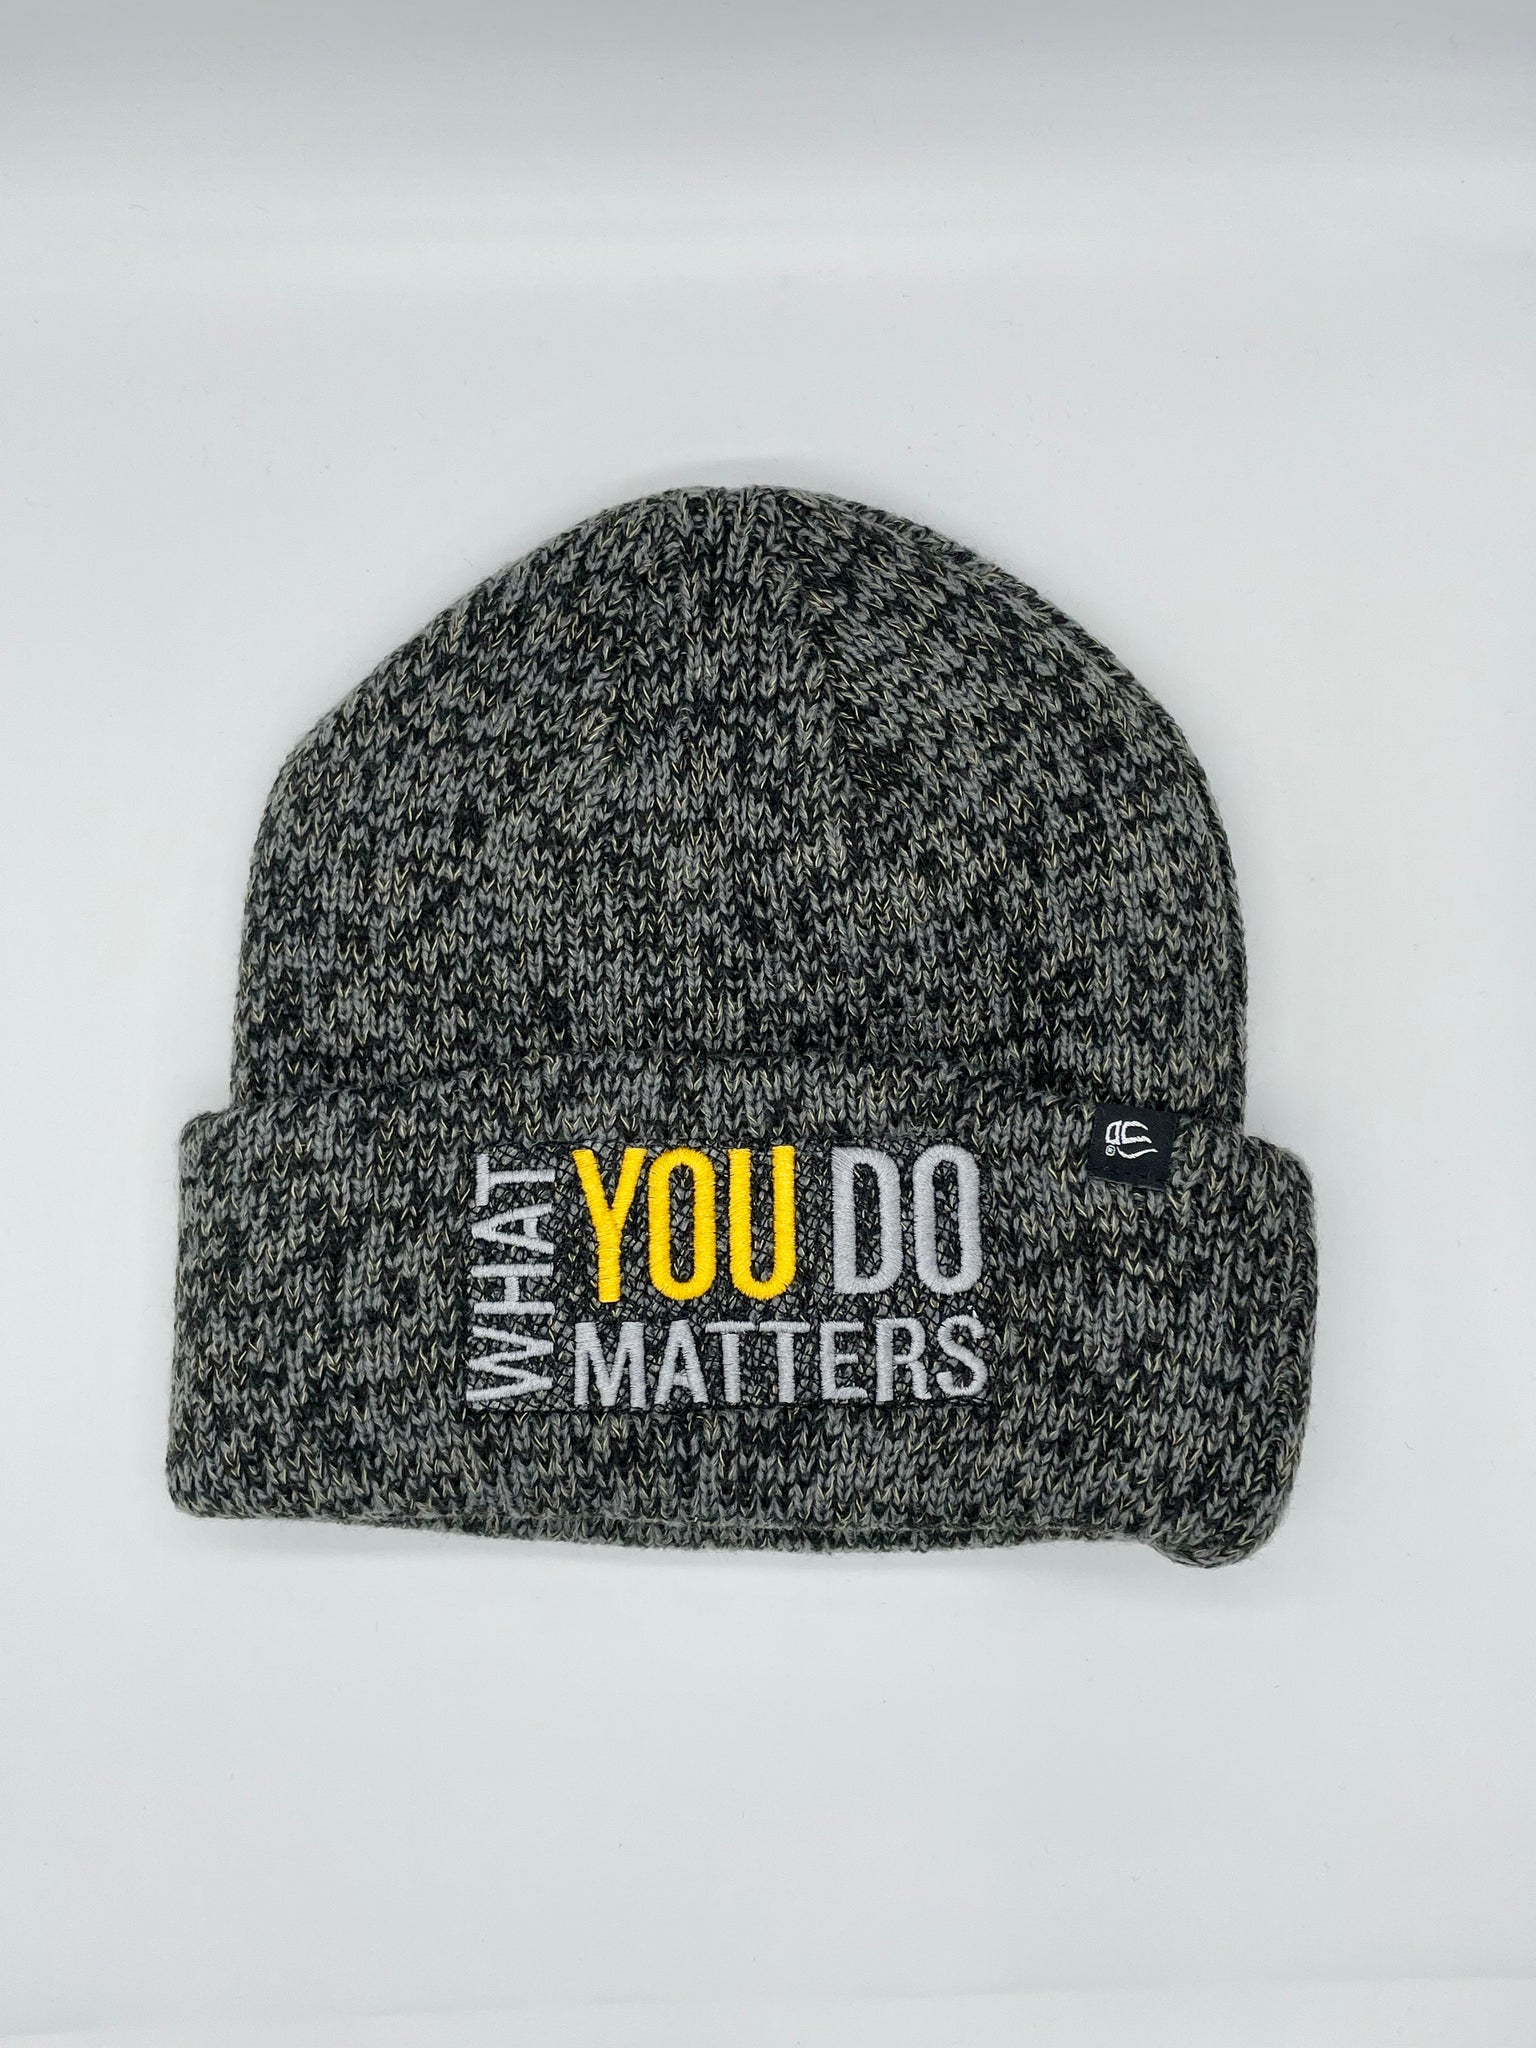 "What You Do Matters" Knit Beanie